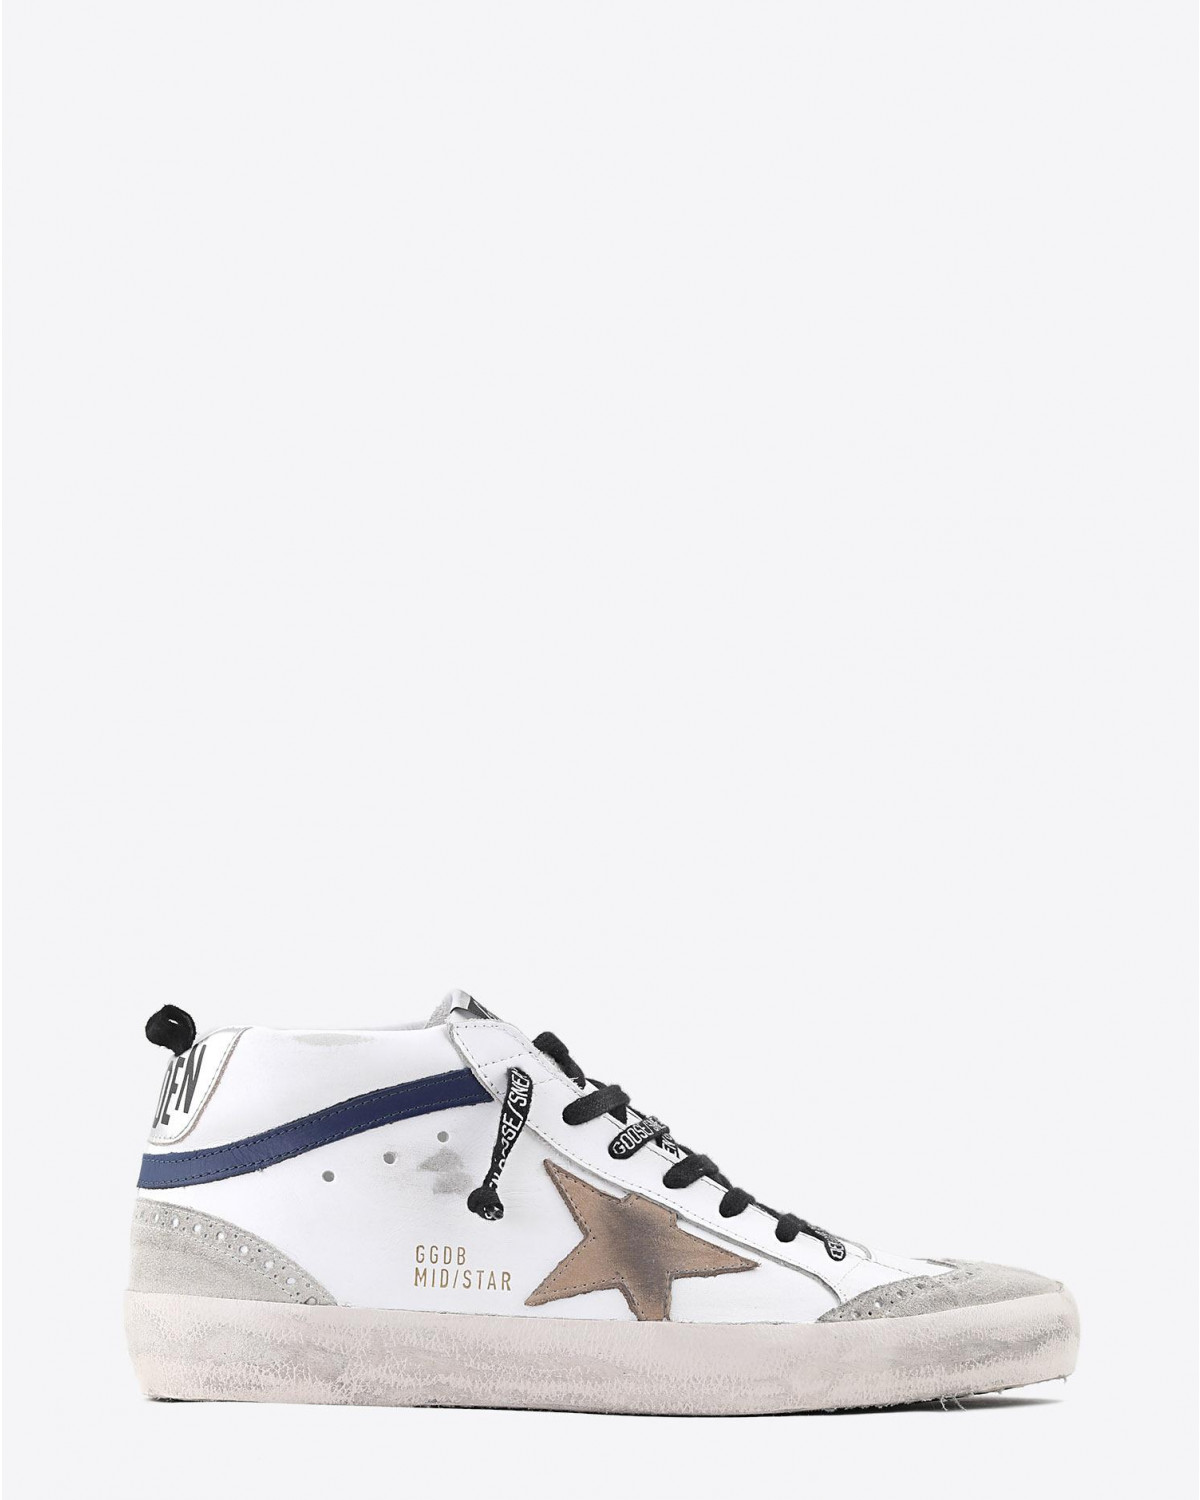 Sneakers Golden Goose Men Sneakers Mid Star - White Blue Leather - Incense Star
